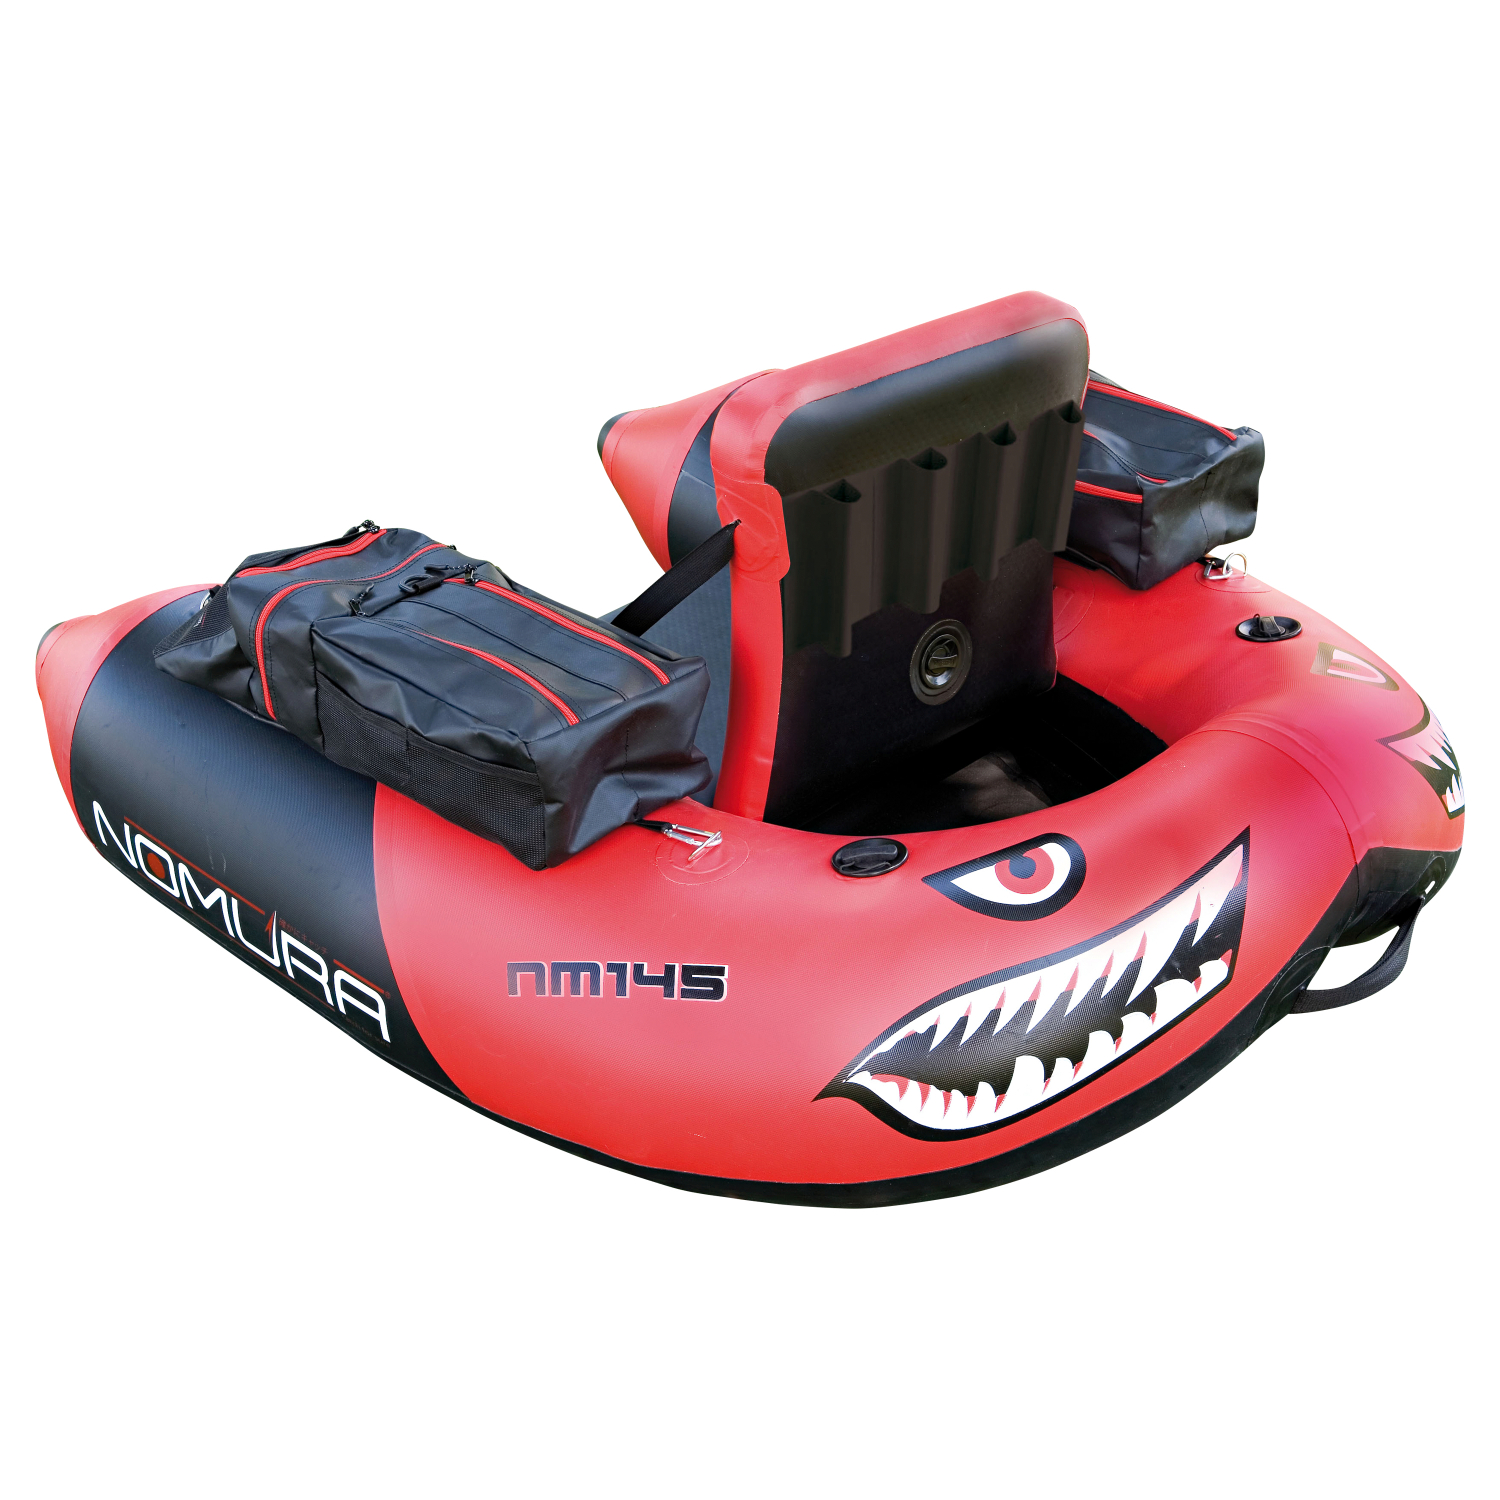 Nomura Boot Belly Boat NM 145 at low prices